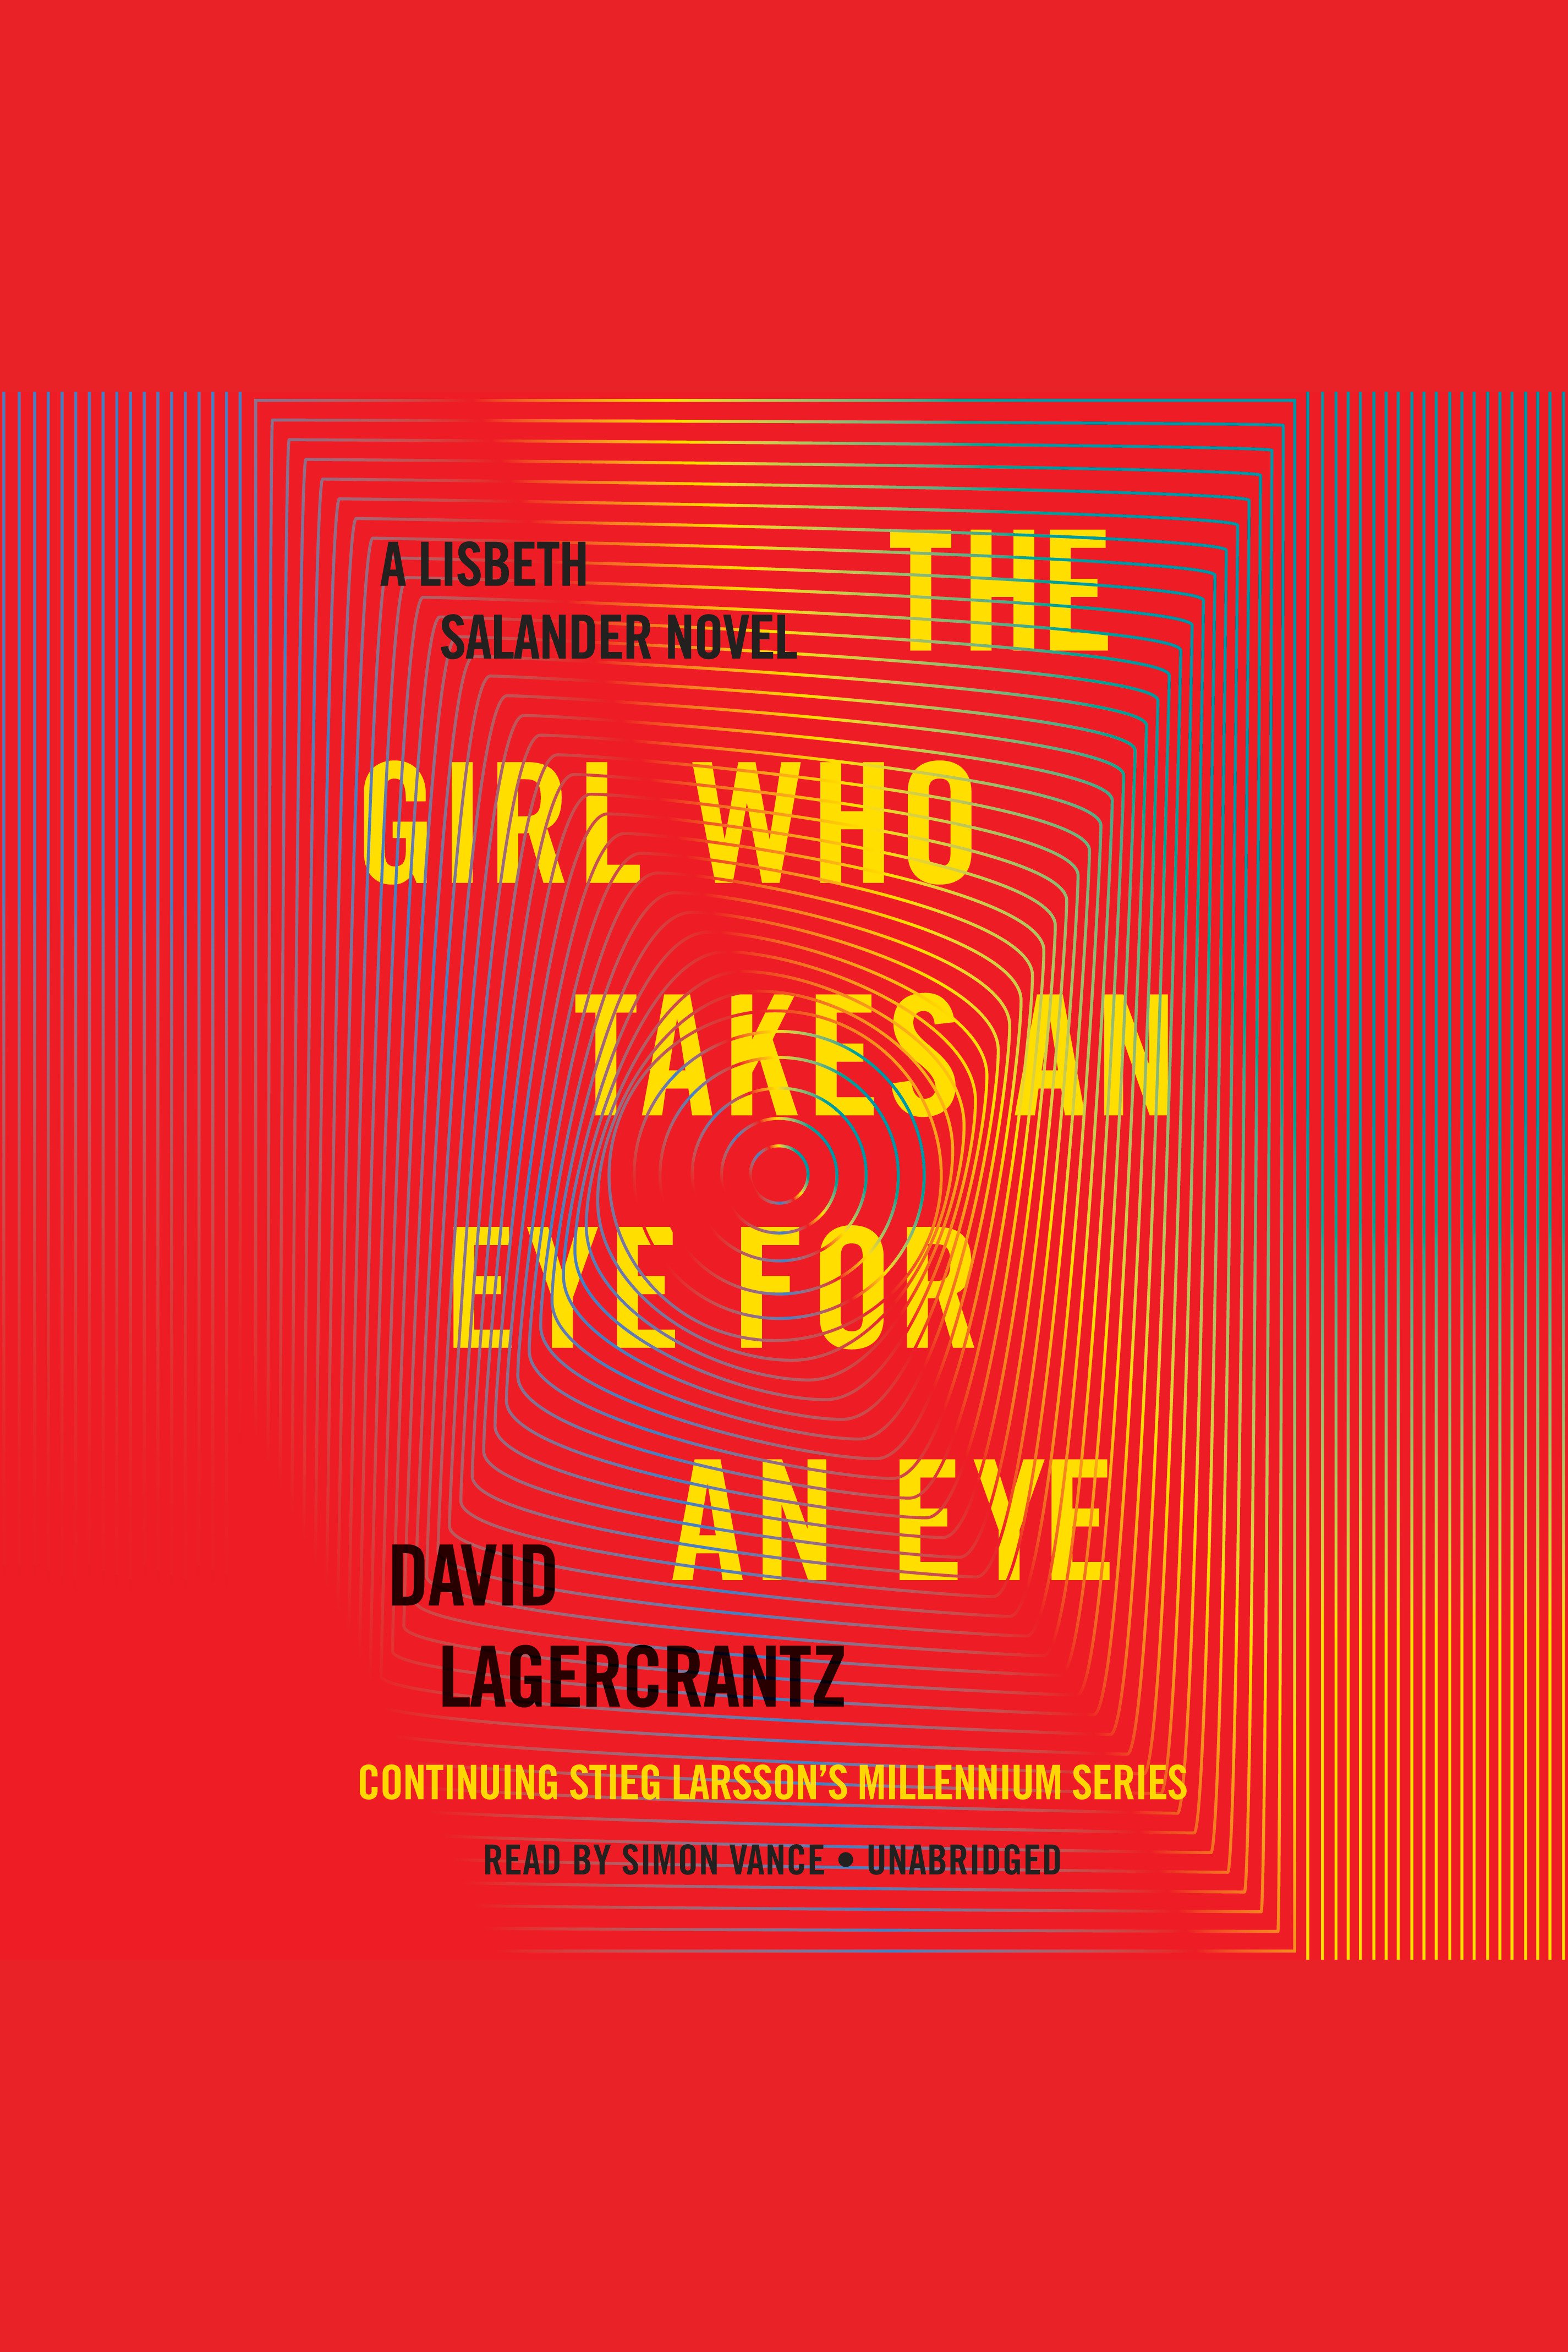 The girl who takes an eye for an eye cover image